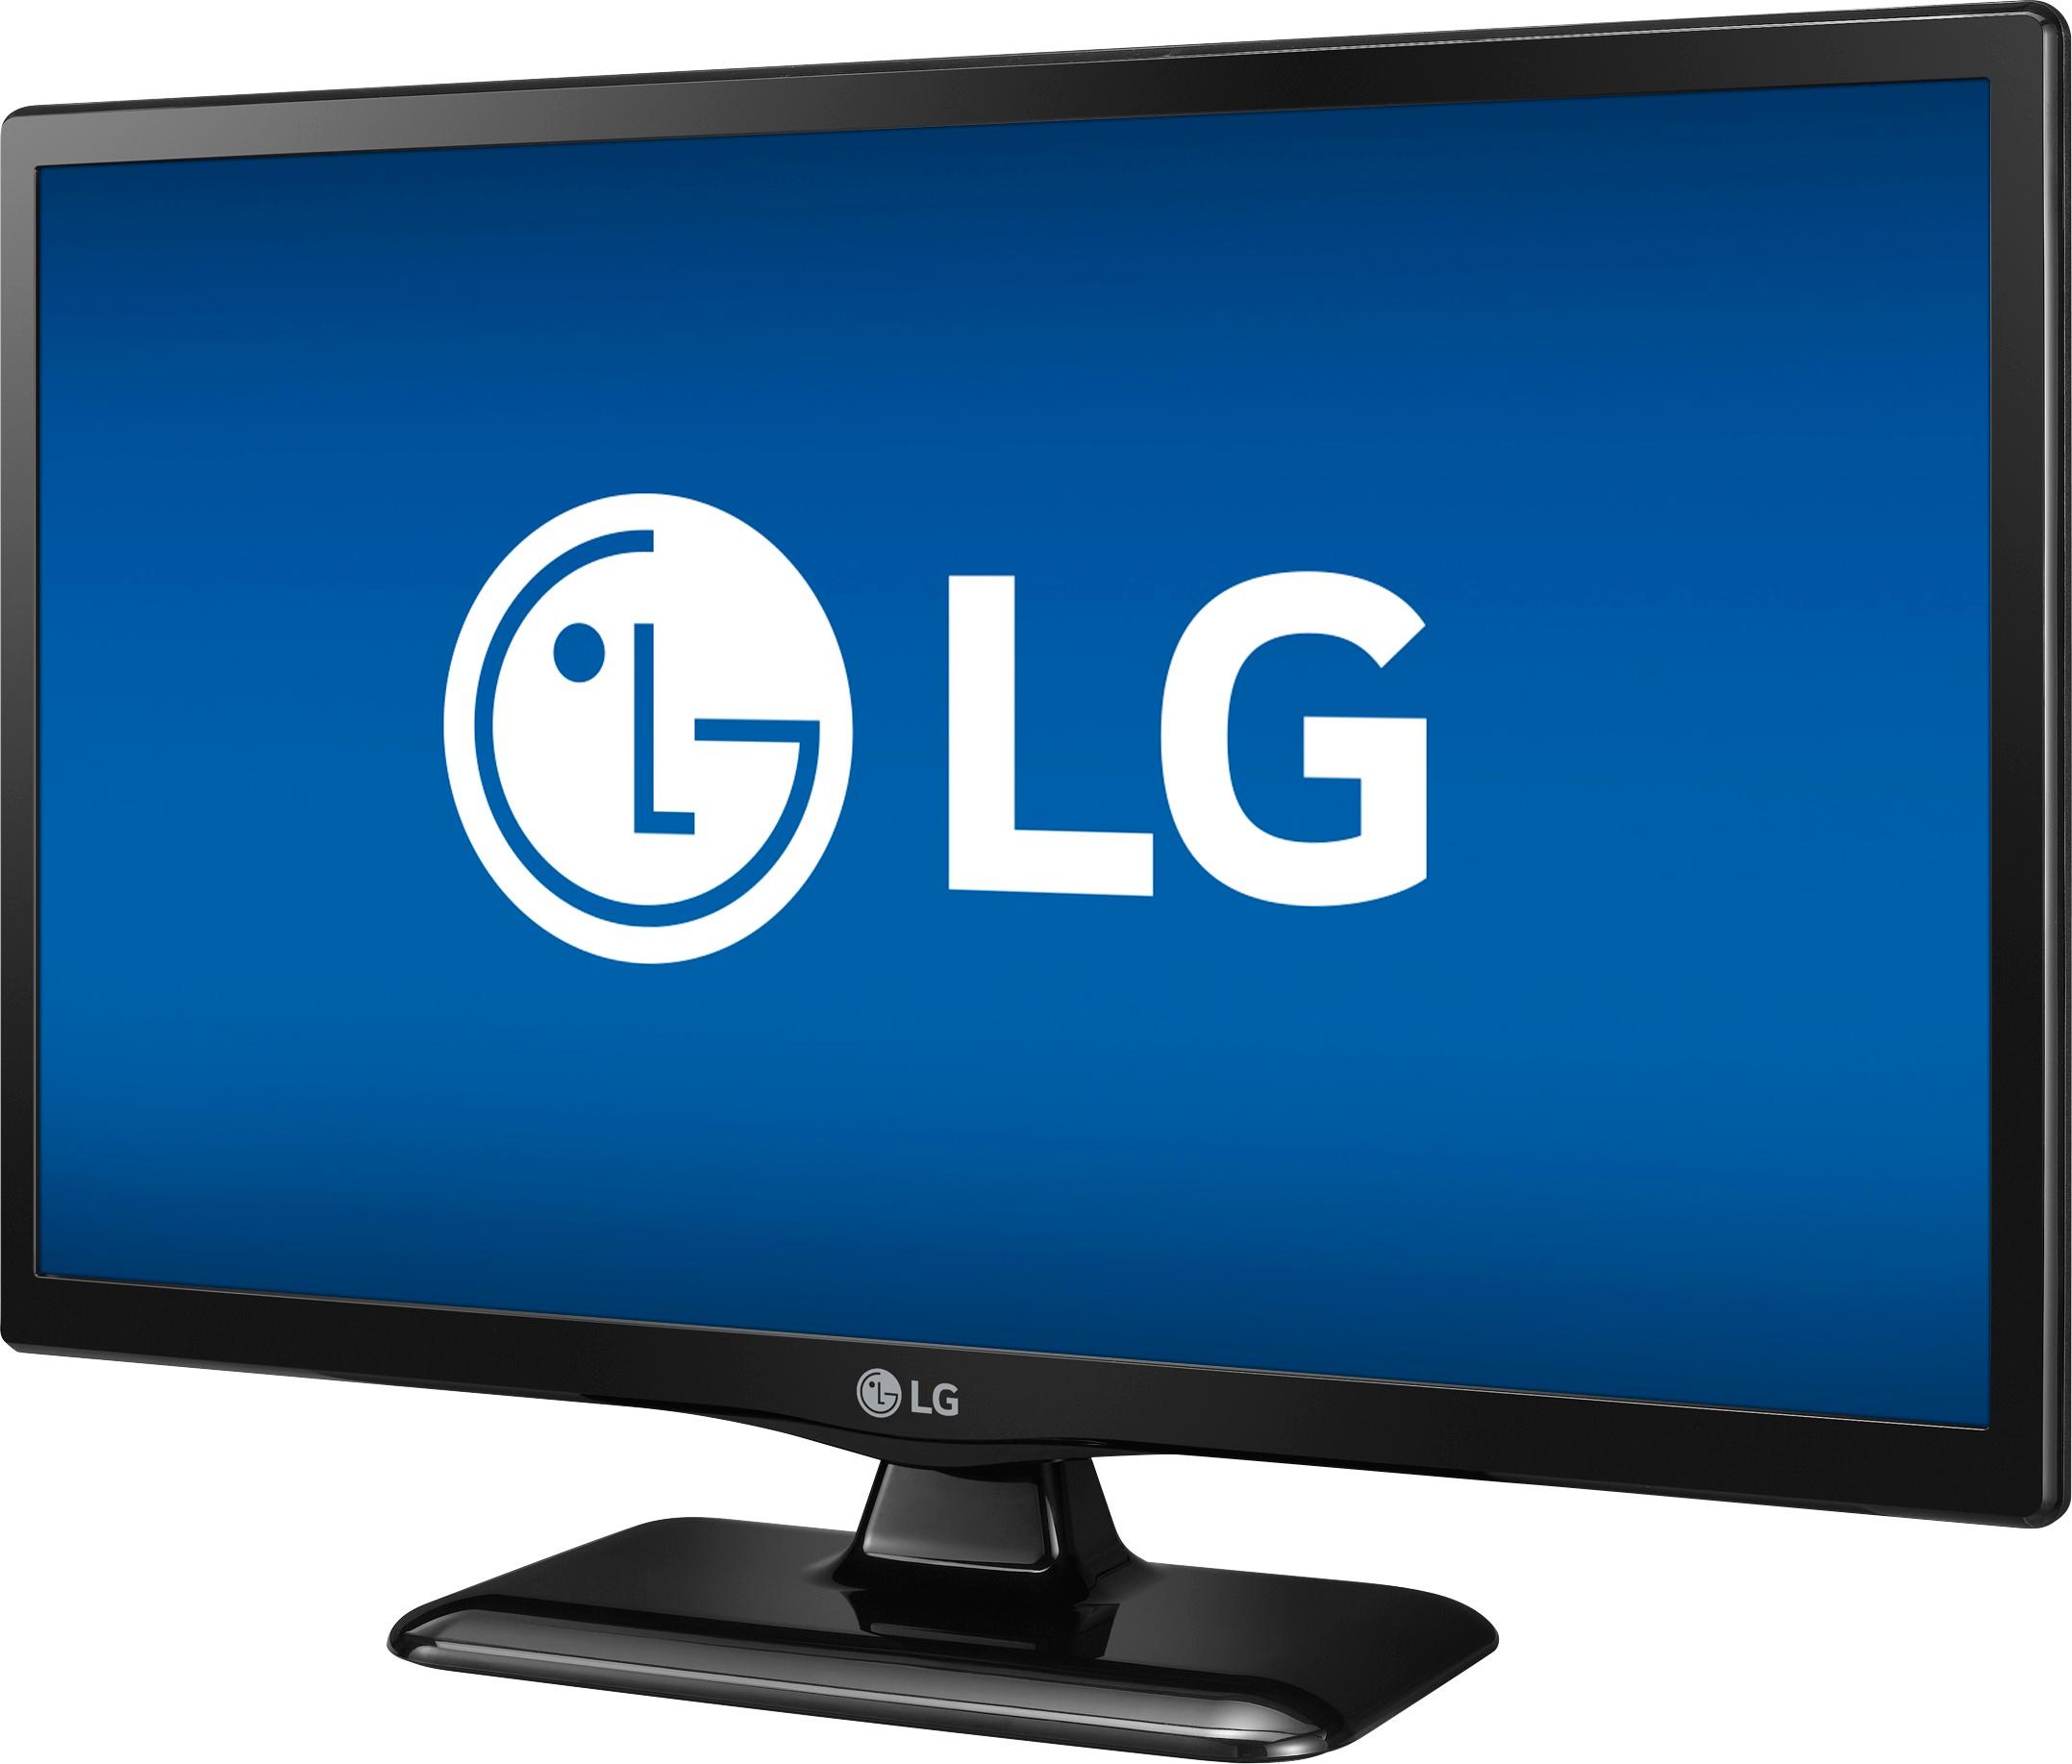 LG 24LF454B TV Review - Consumer Reports